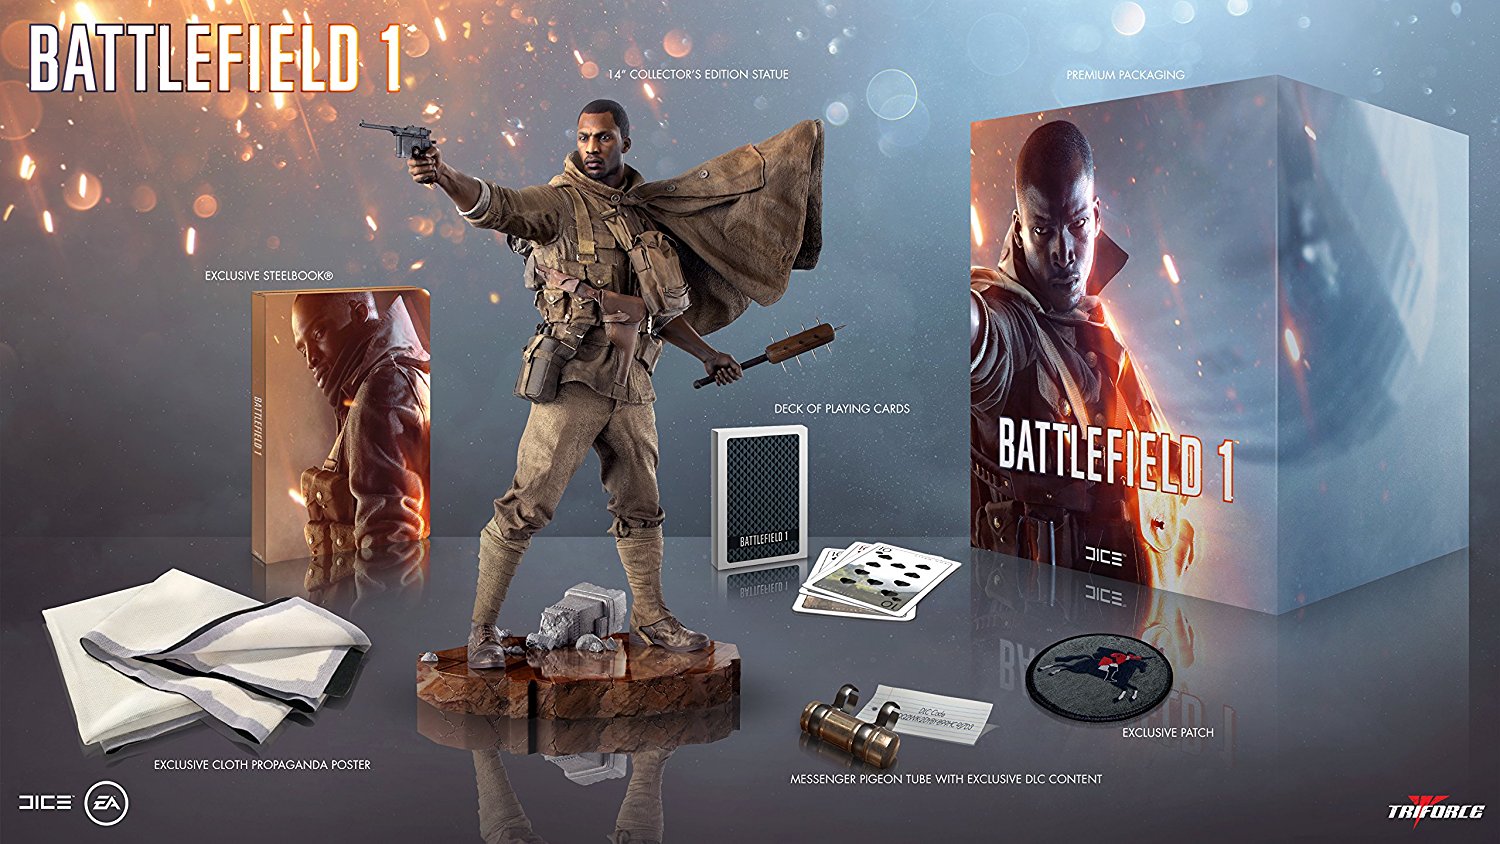 Battlefield Collector's Edition Press Kit